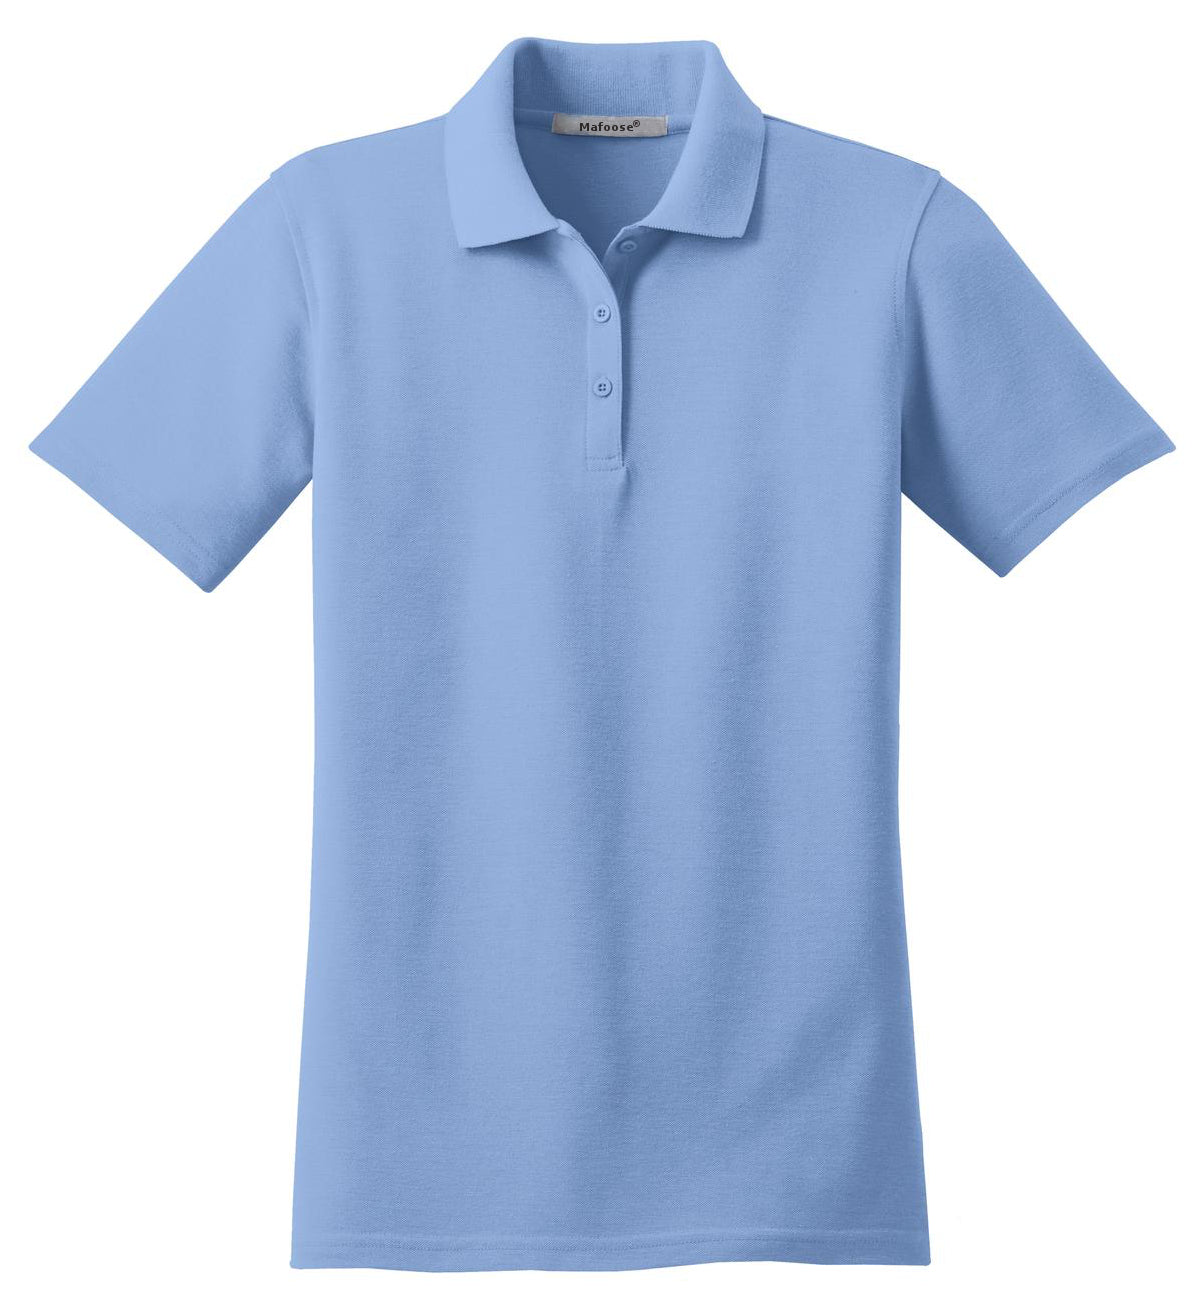 Mafoose Women's Stain Resistant Polo Shirt Light Blue-Front